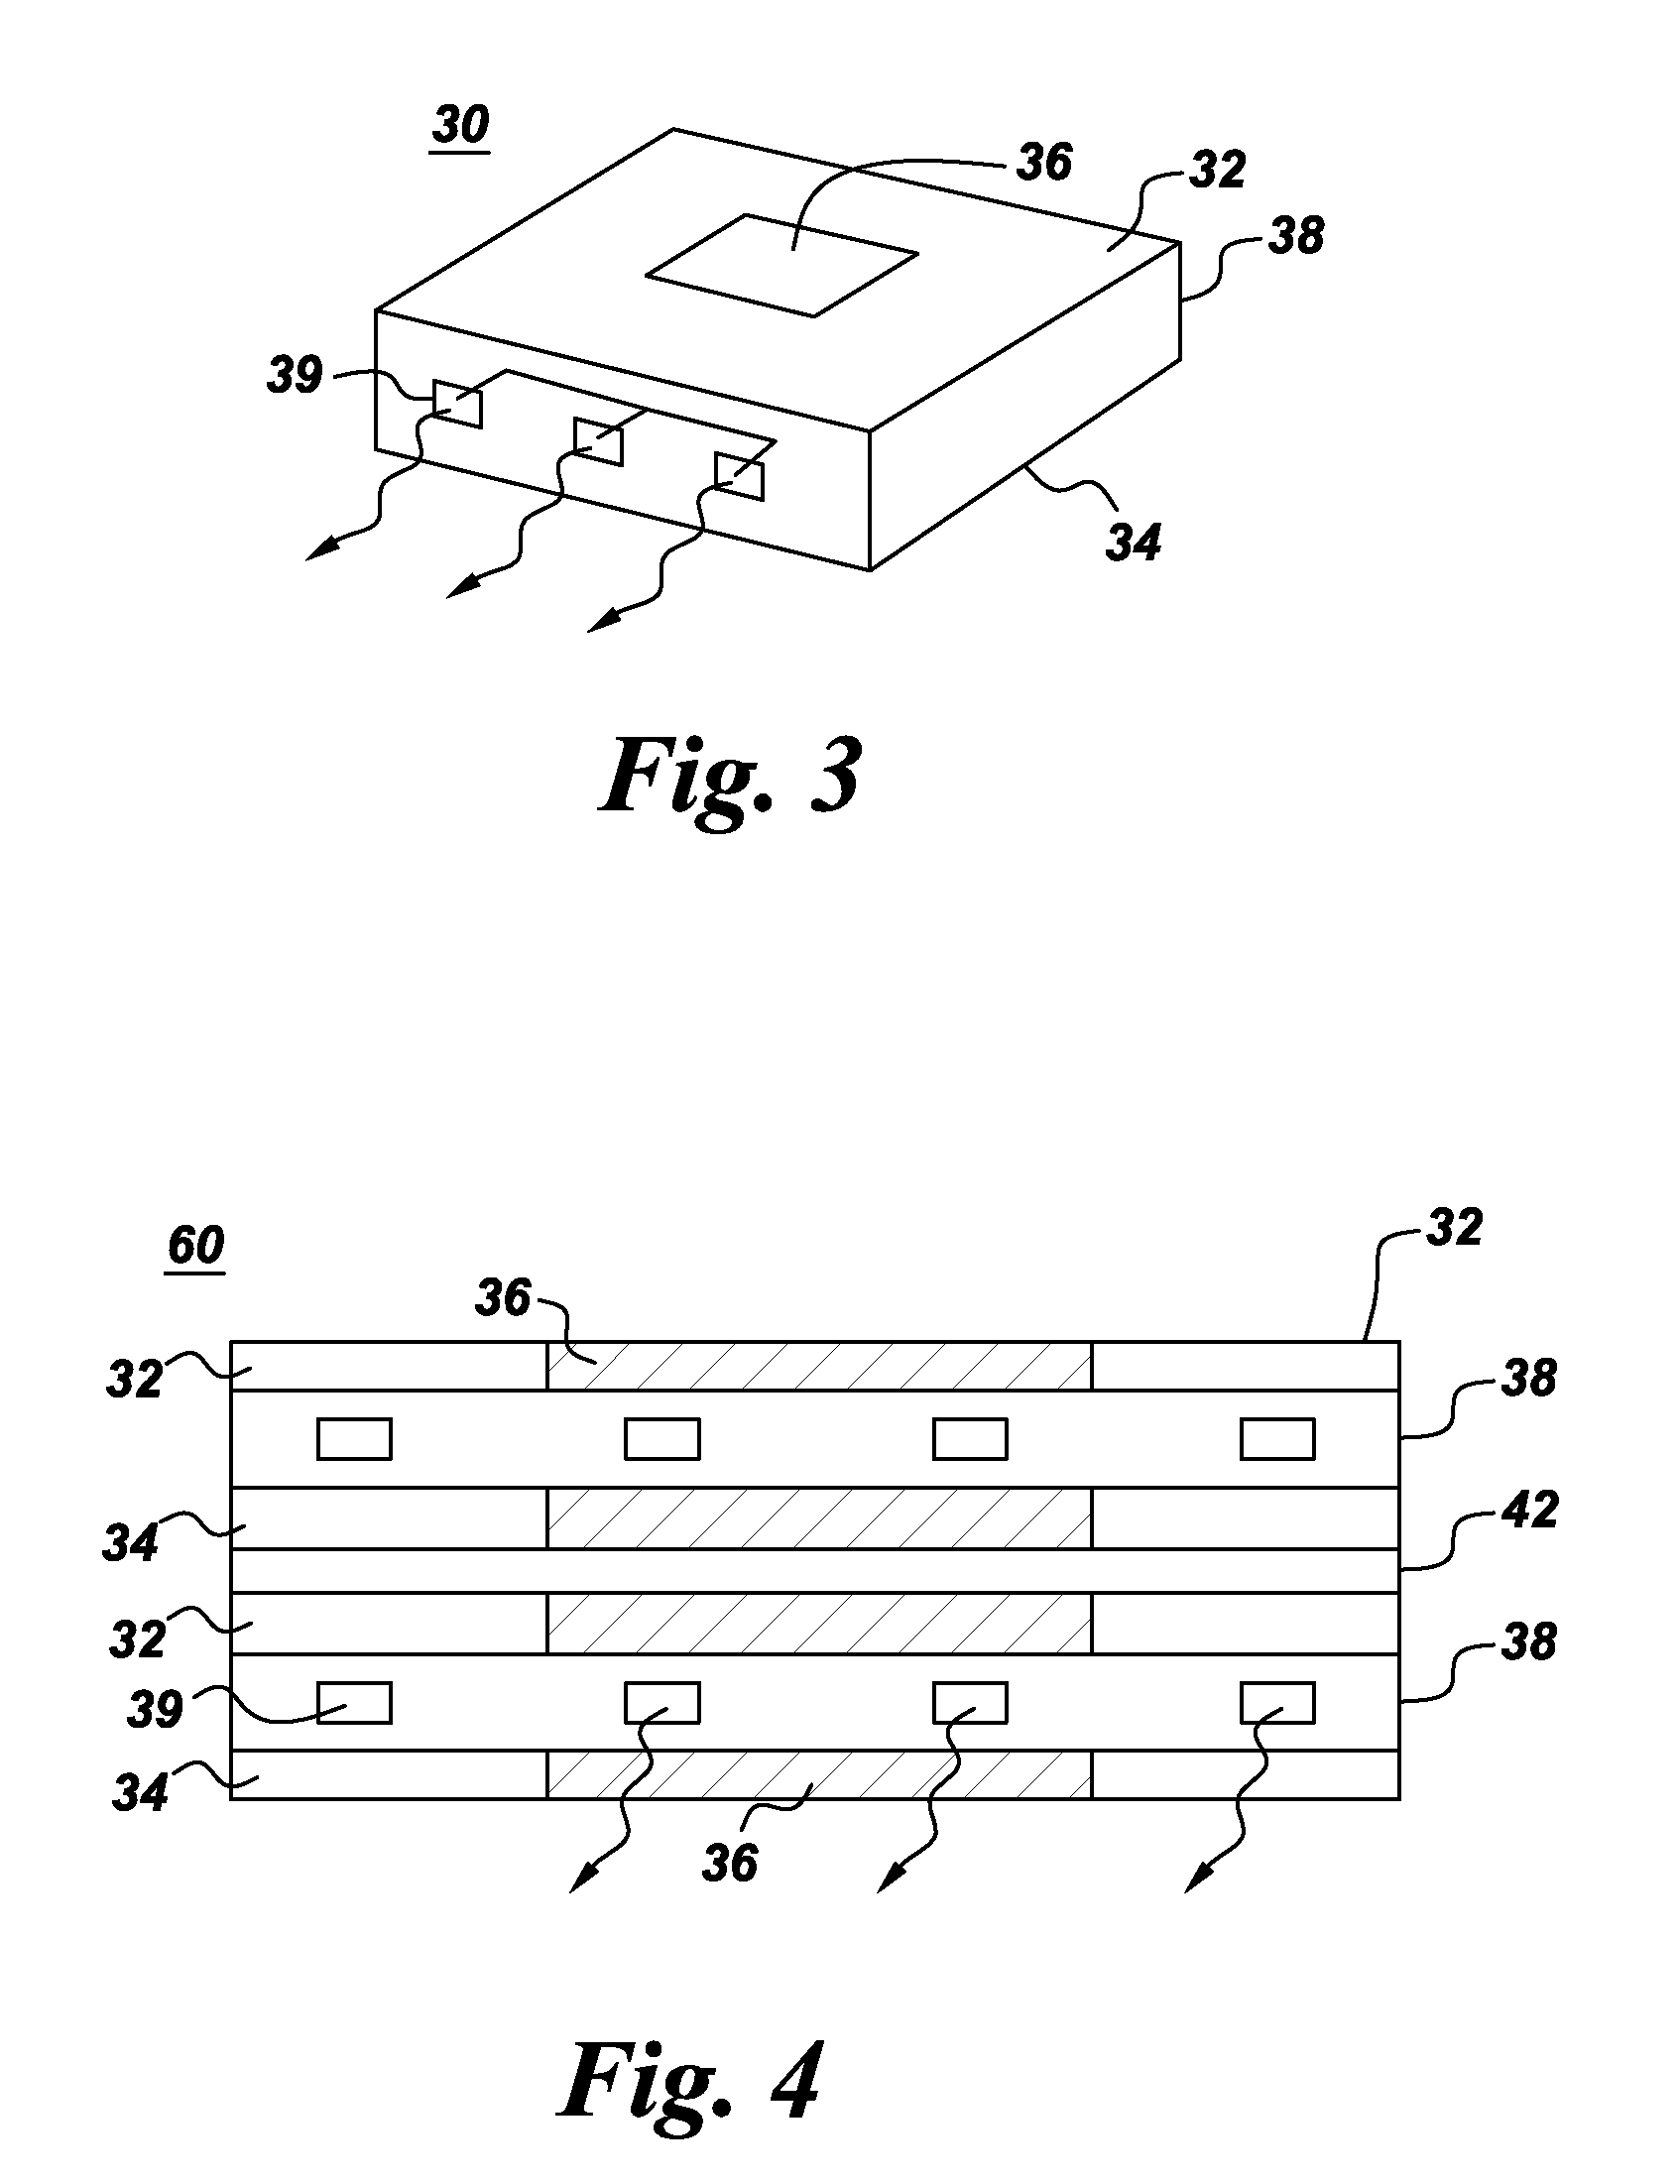 Heat sinks with distributed and integrated jet cooling